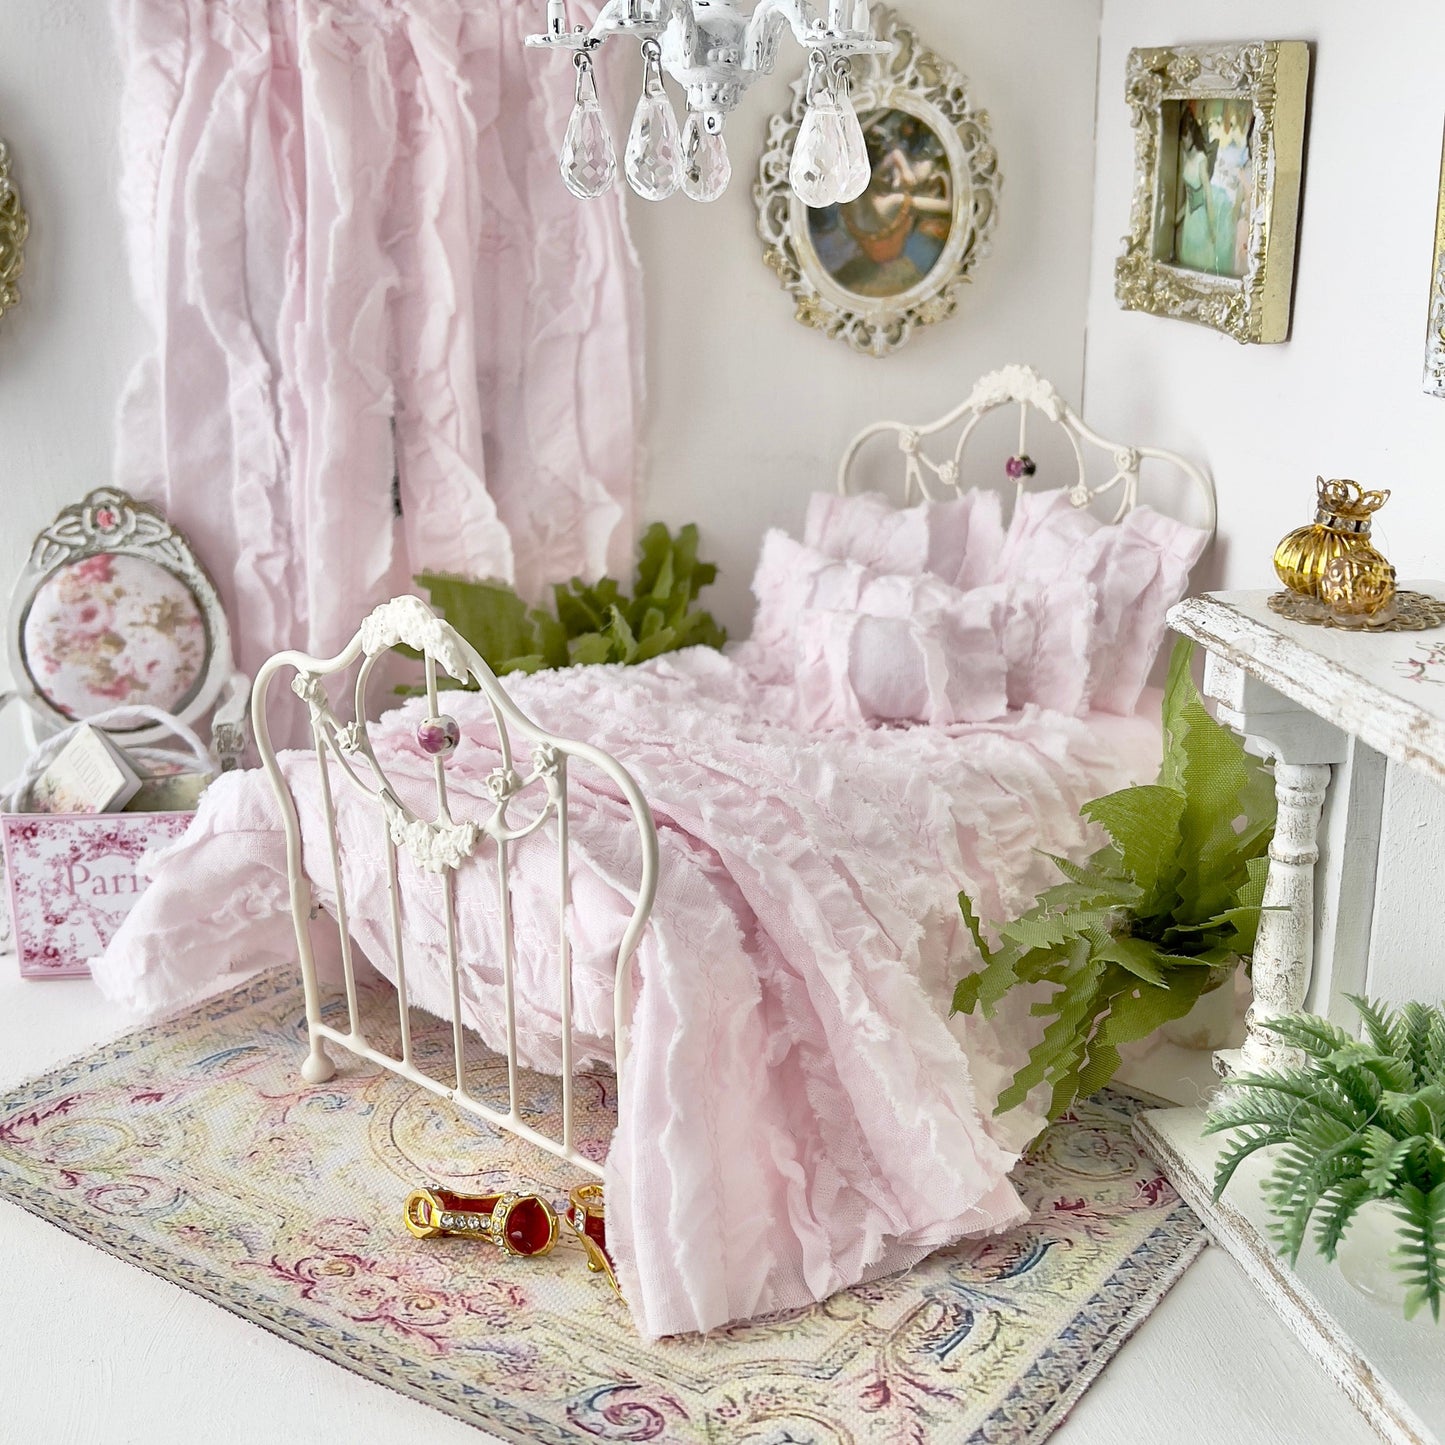 Chantallena White Bed Linens double (10 inch by 9 inch) Tattered Romance |  Pink Cotton Lawn Distressed Ruffles Set | Emma